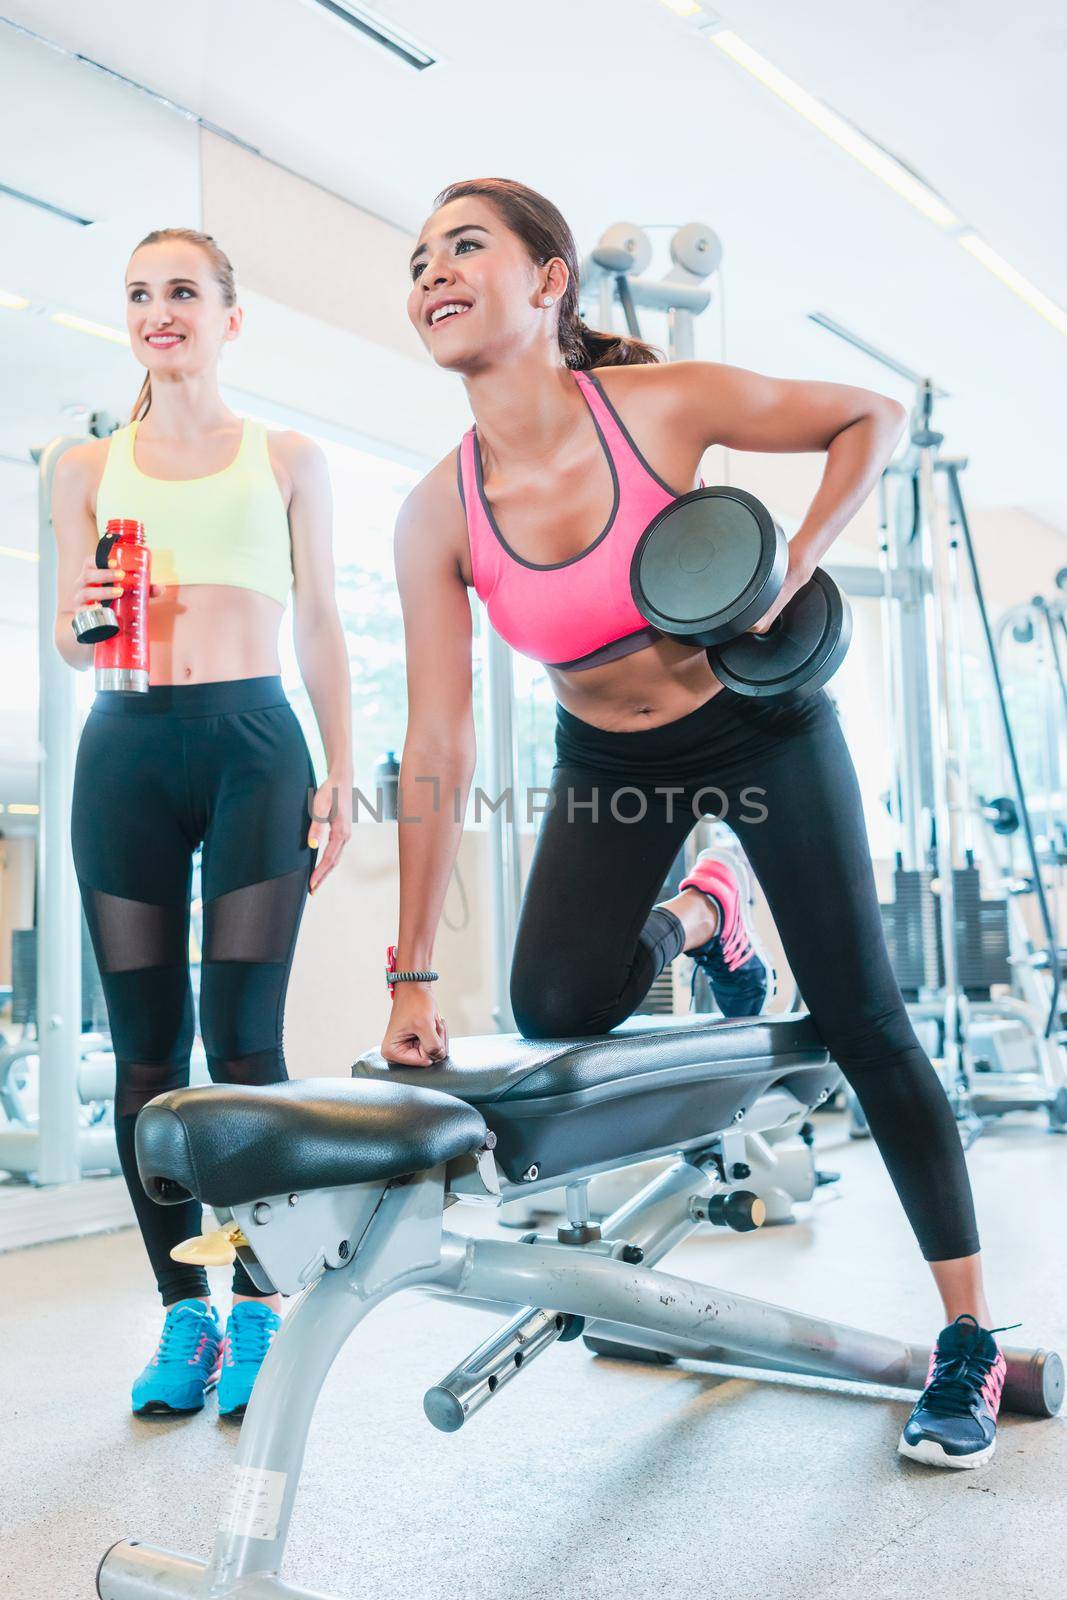 Low-angle view portrait of a determined and powerful young woman smiling and holding a dumbbell